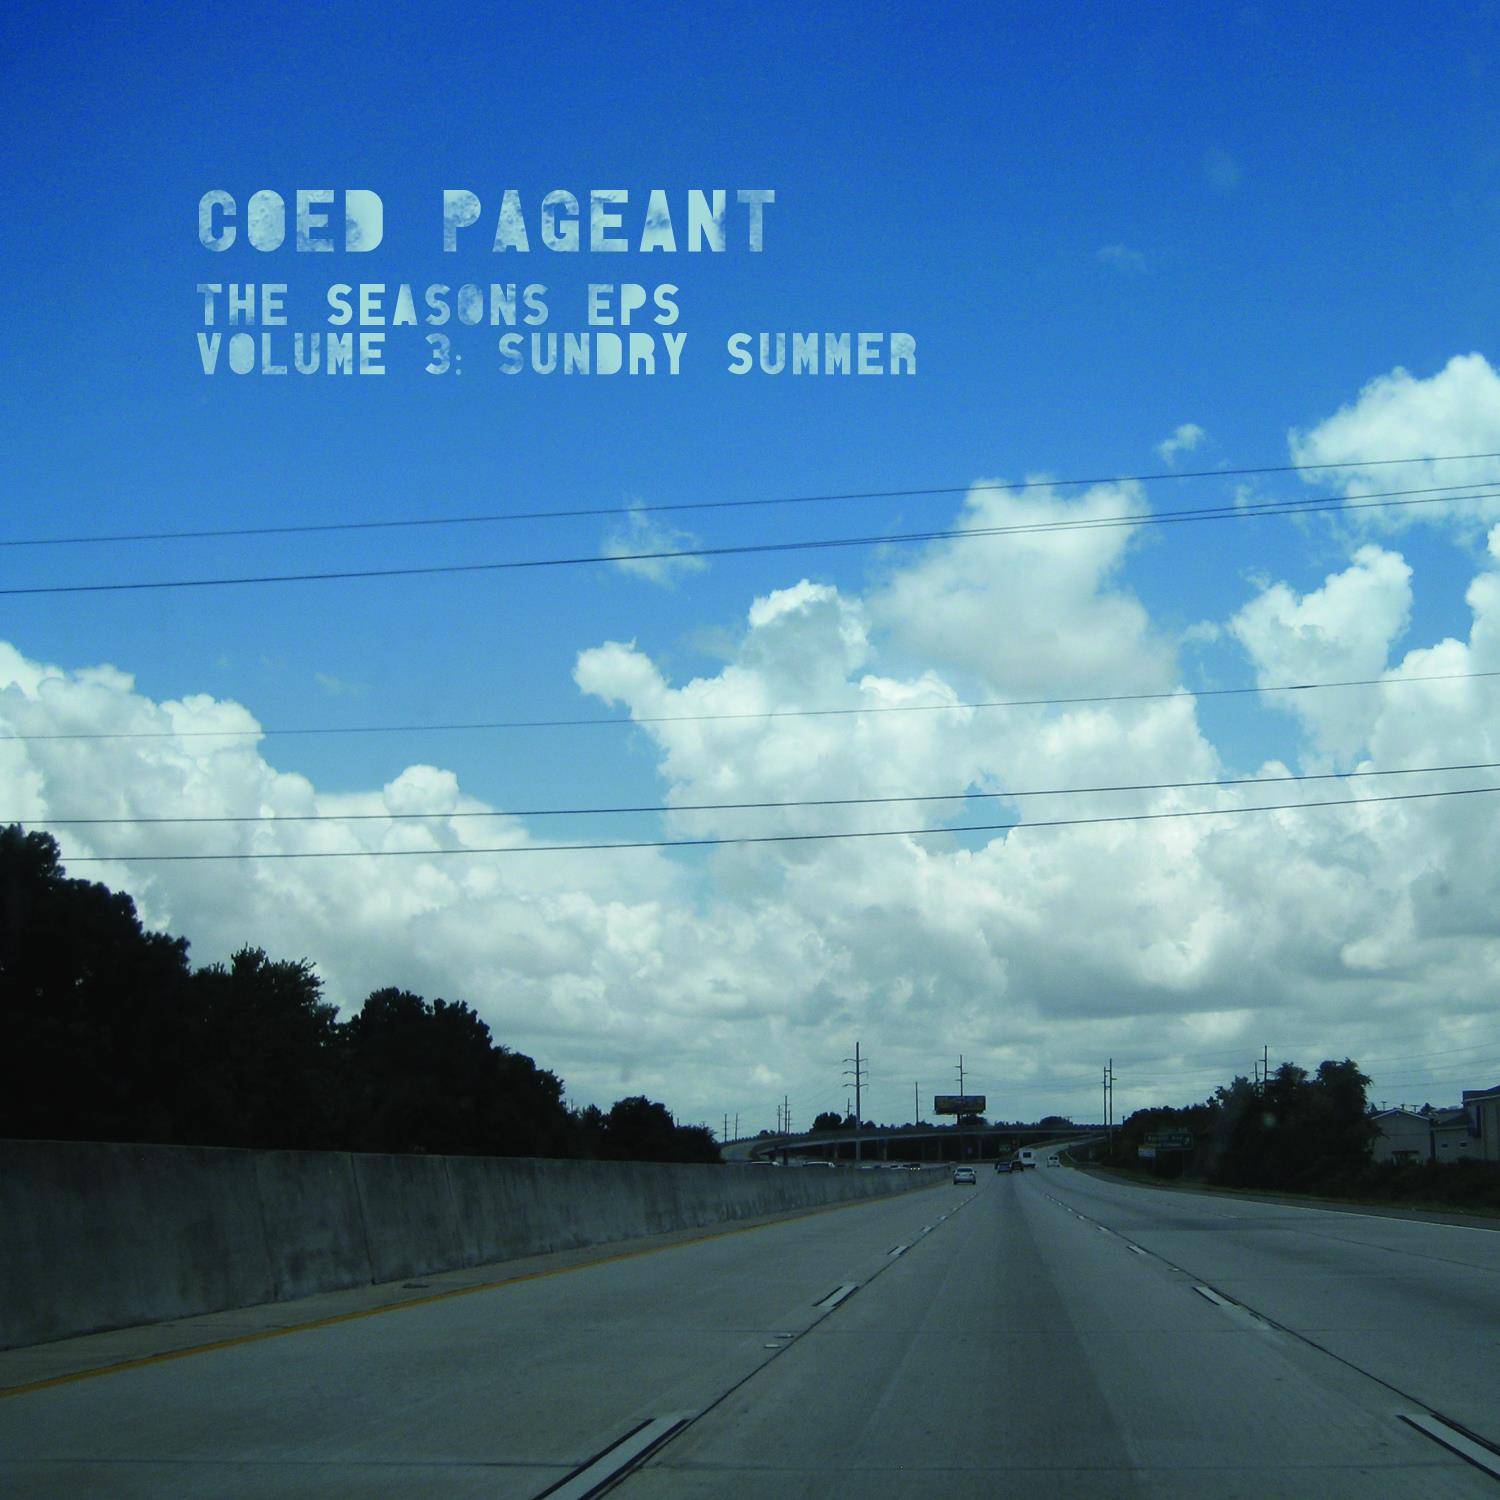 Today on SP Radio: Coed Pageant and their seasonal EP series